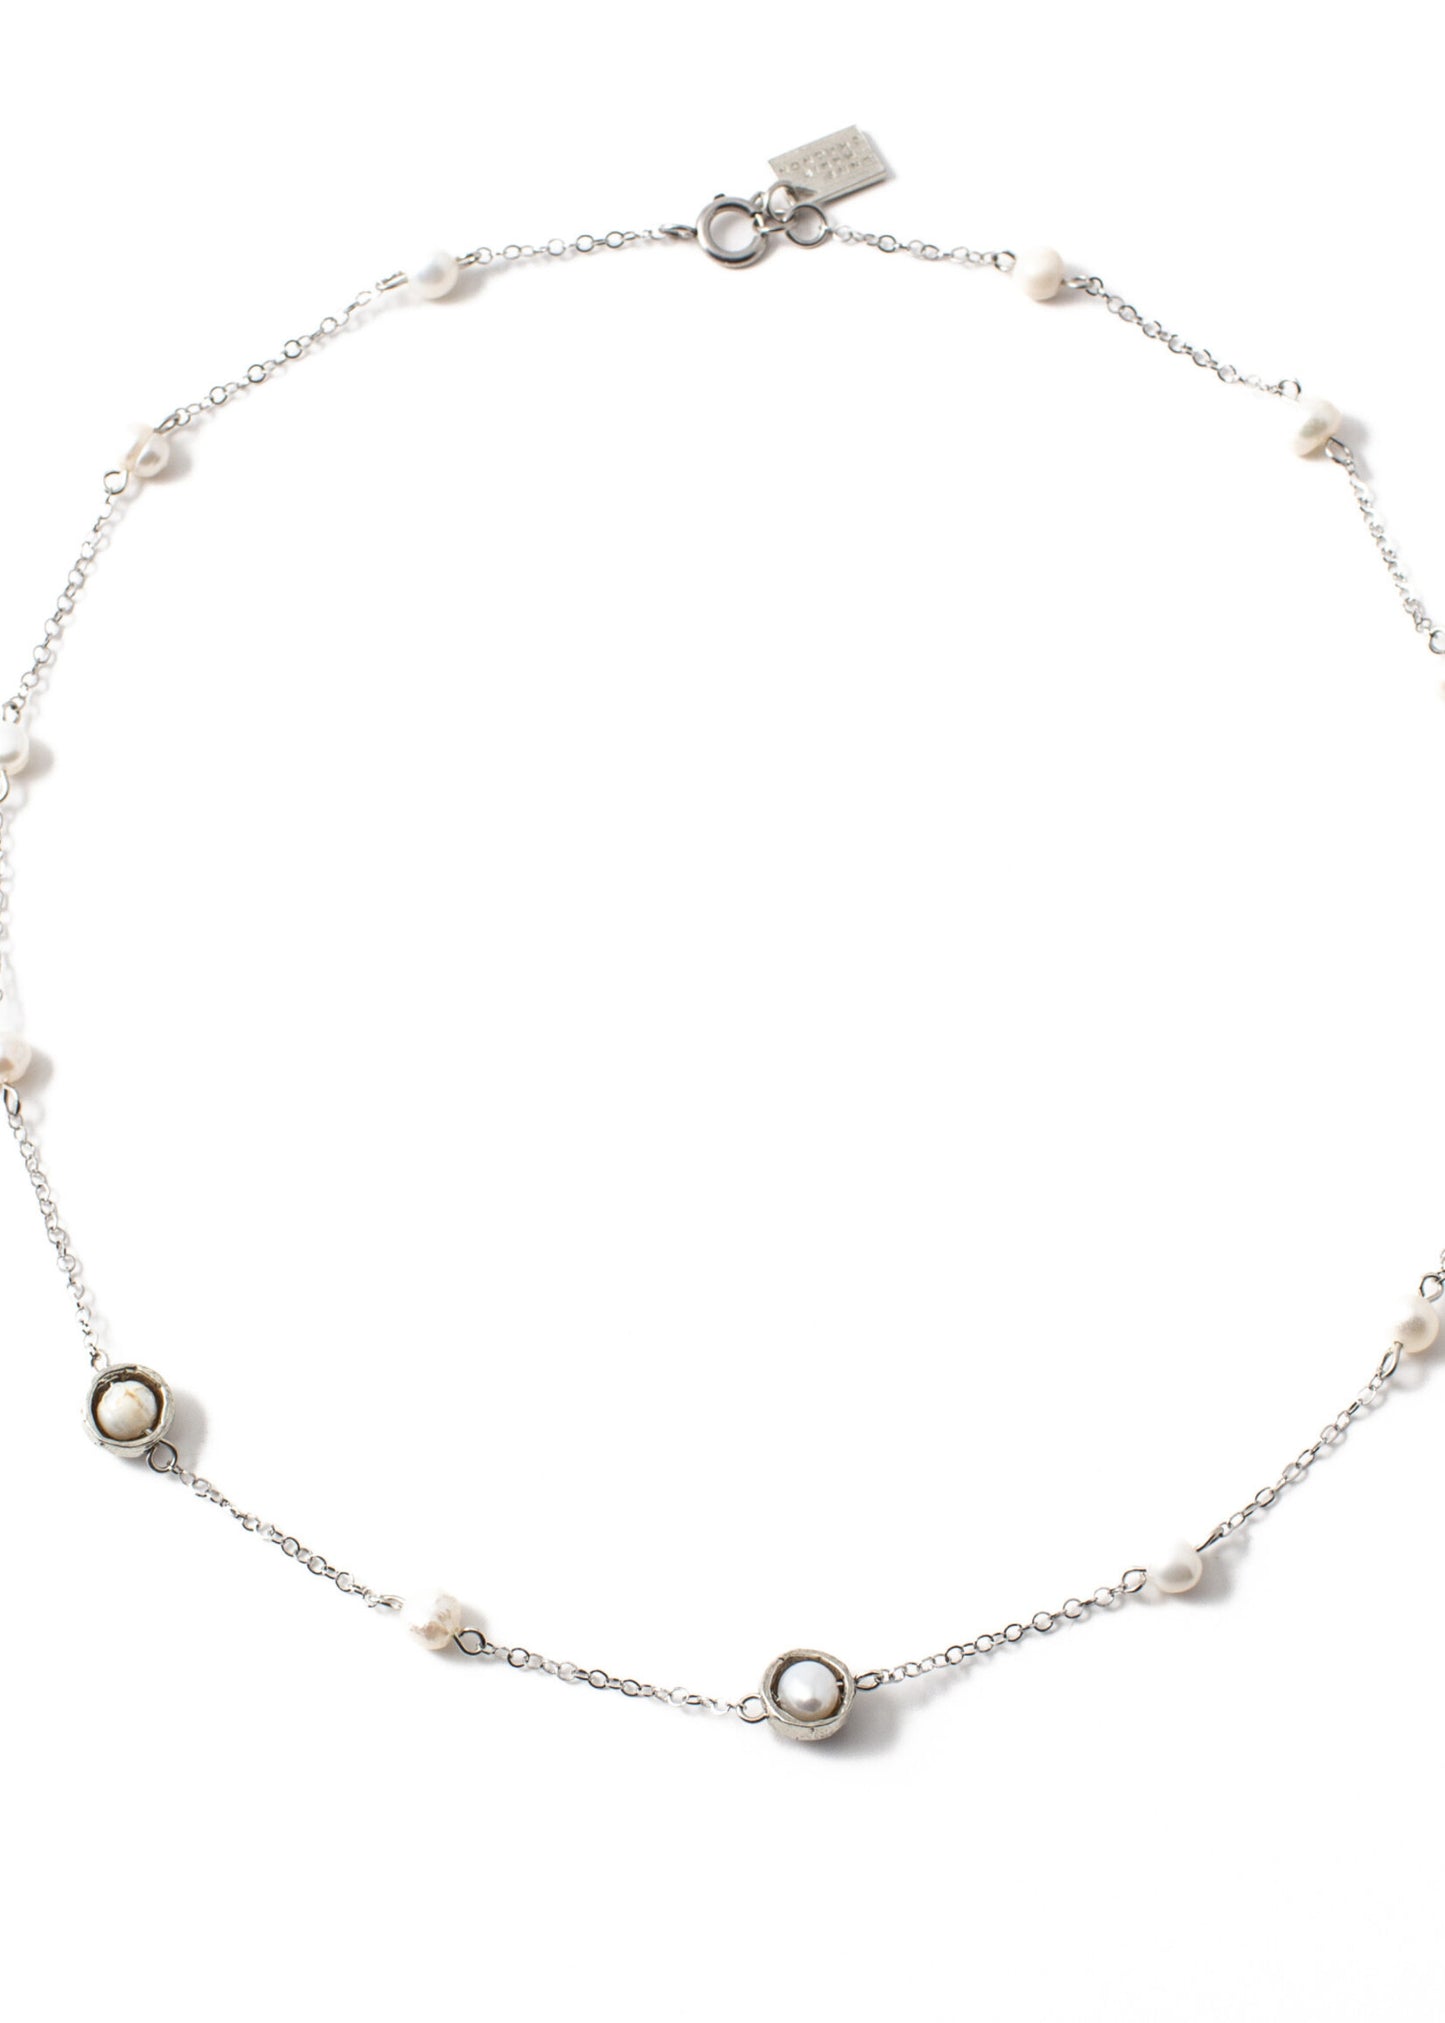 Isadoral Necklace by Anne-Marie Chagnon in Silvery